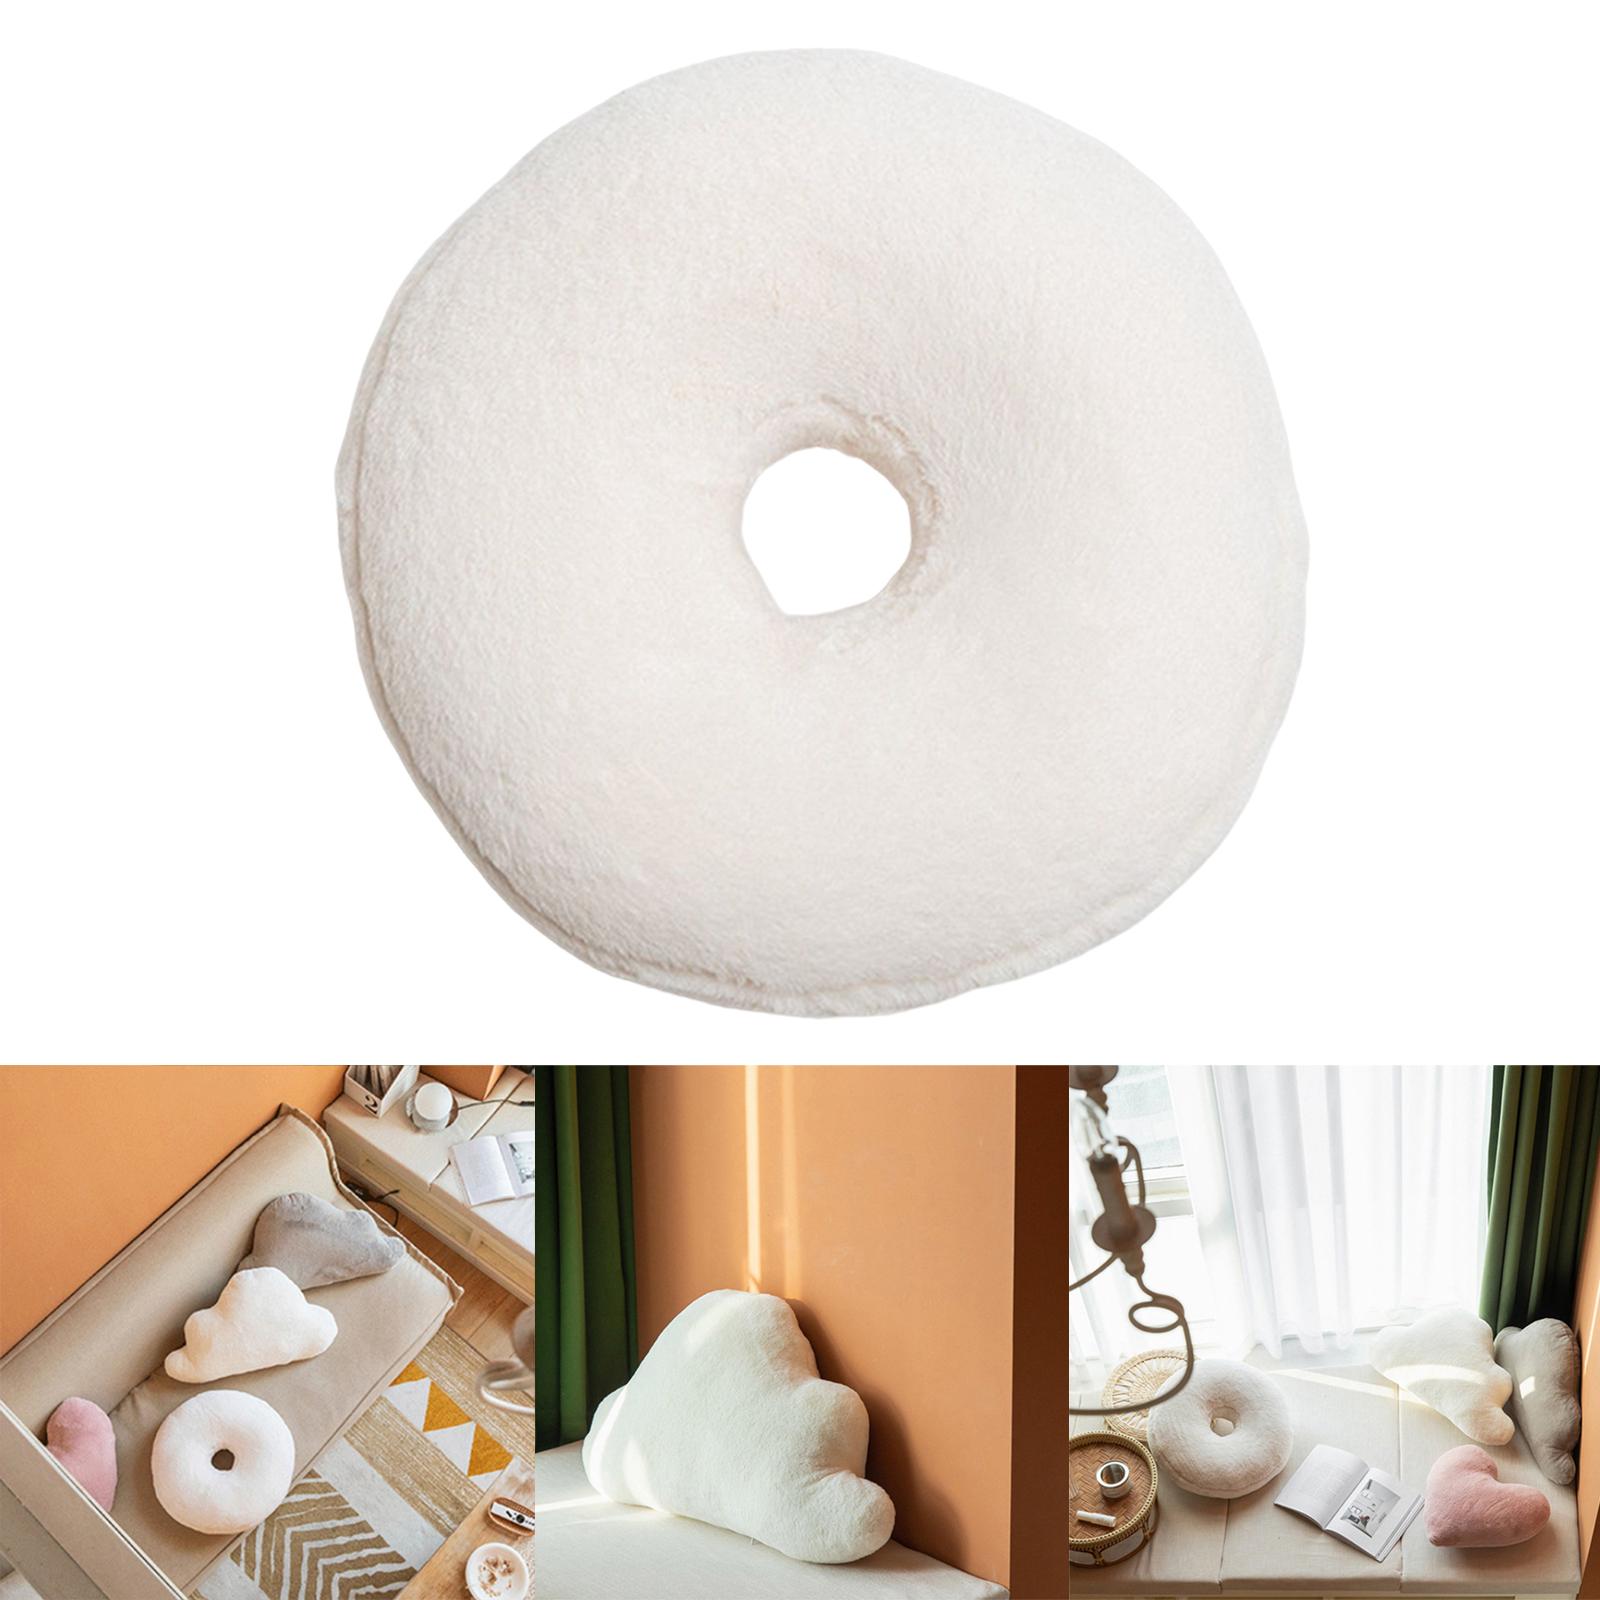 Plush Throw Pillows Filled Cute Decorative Pillow for Couch Bed Donut